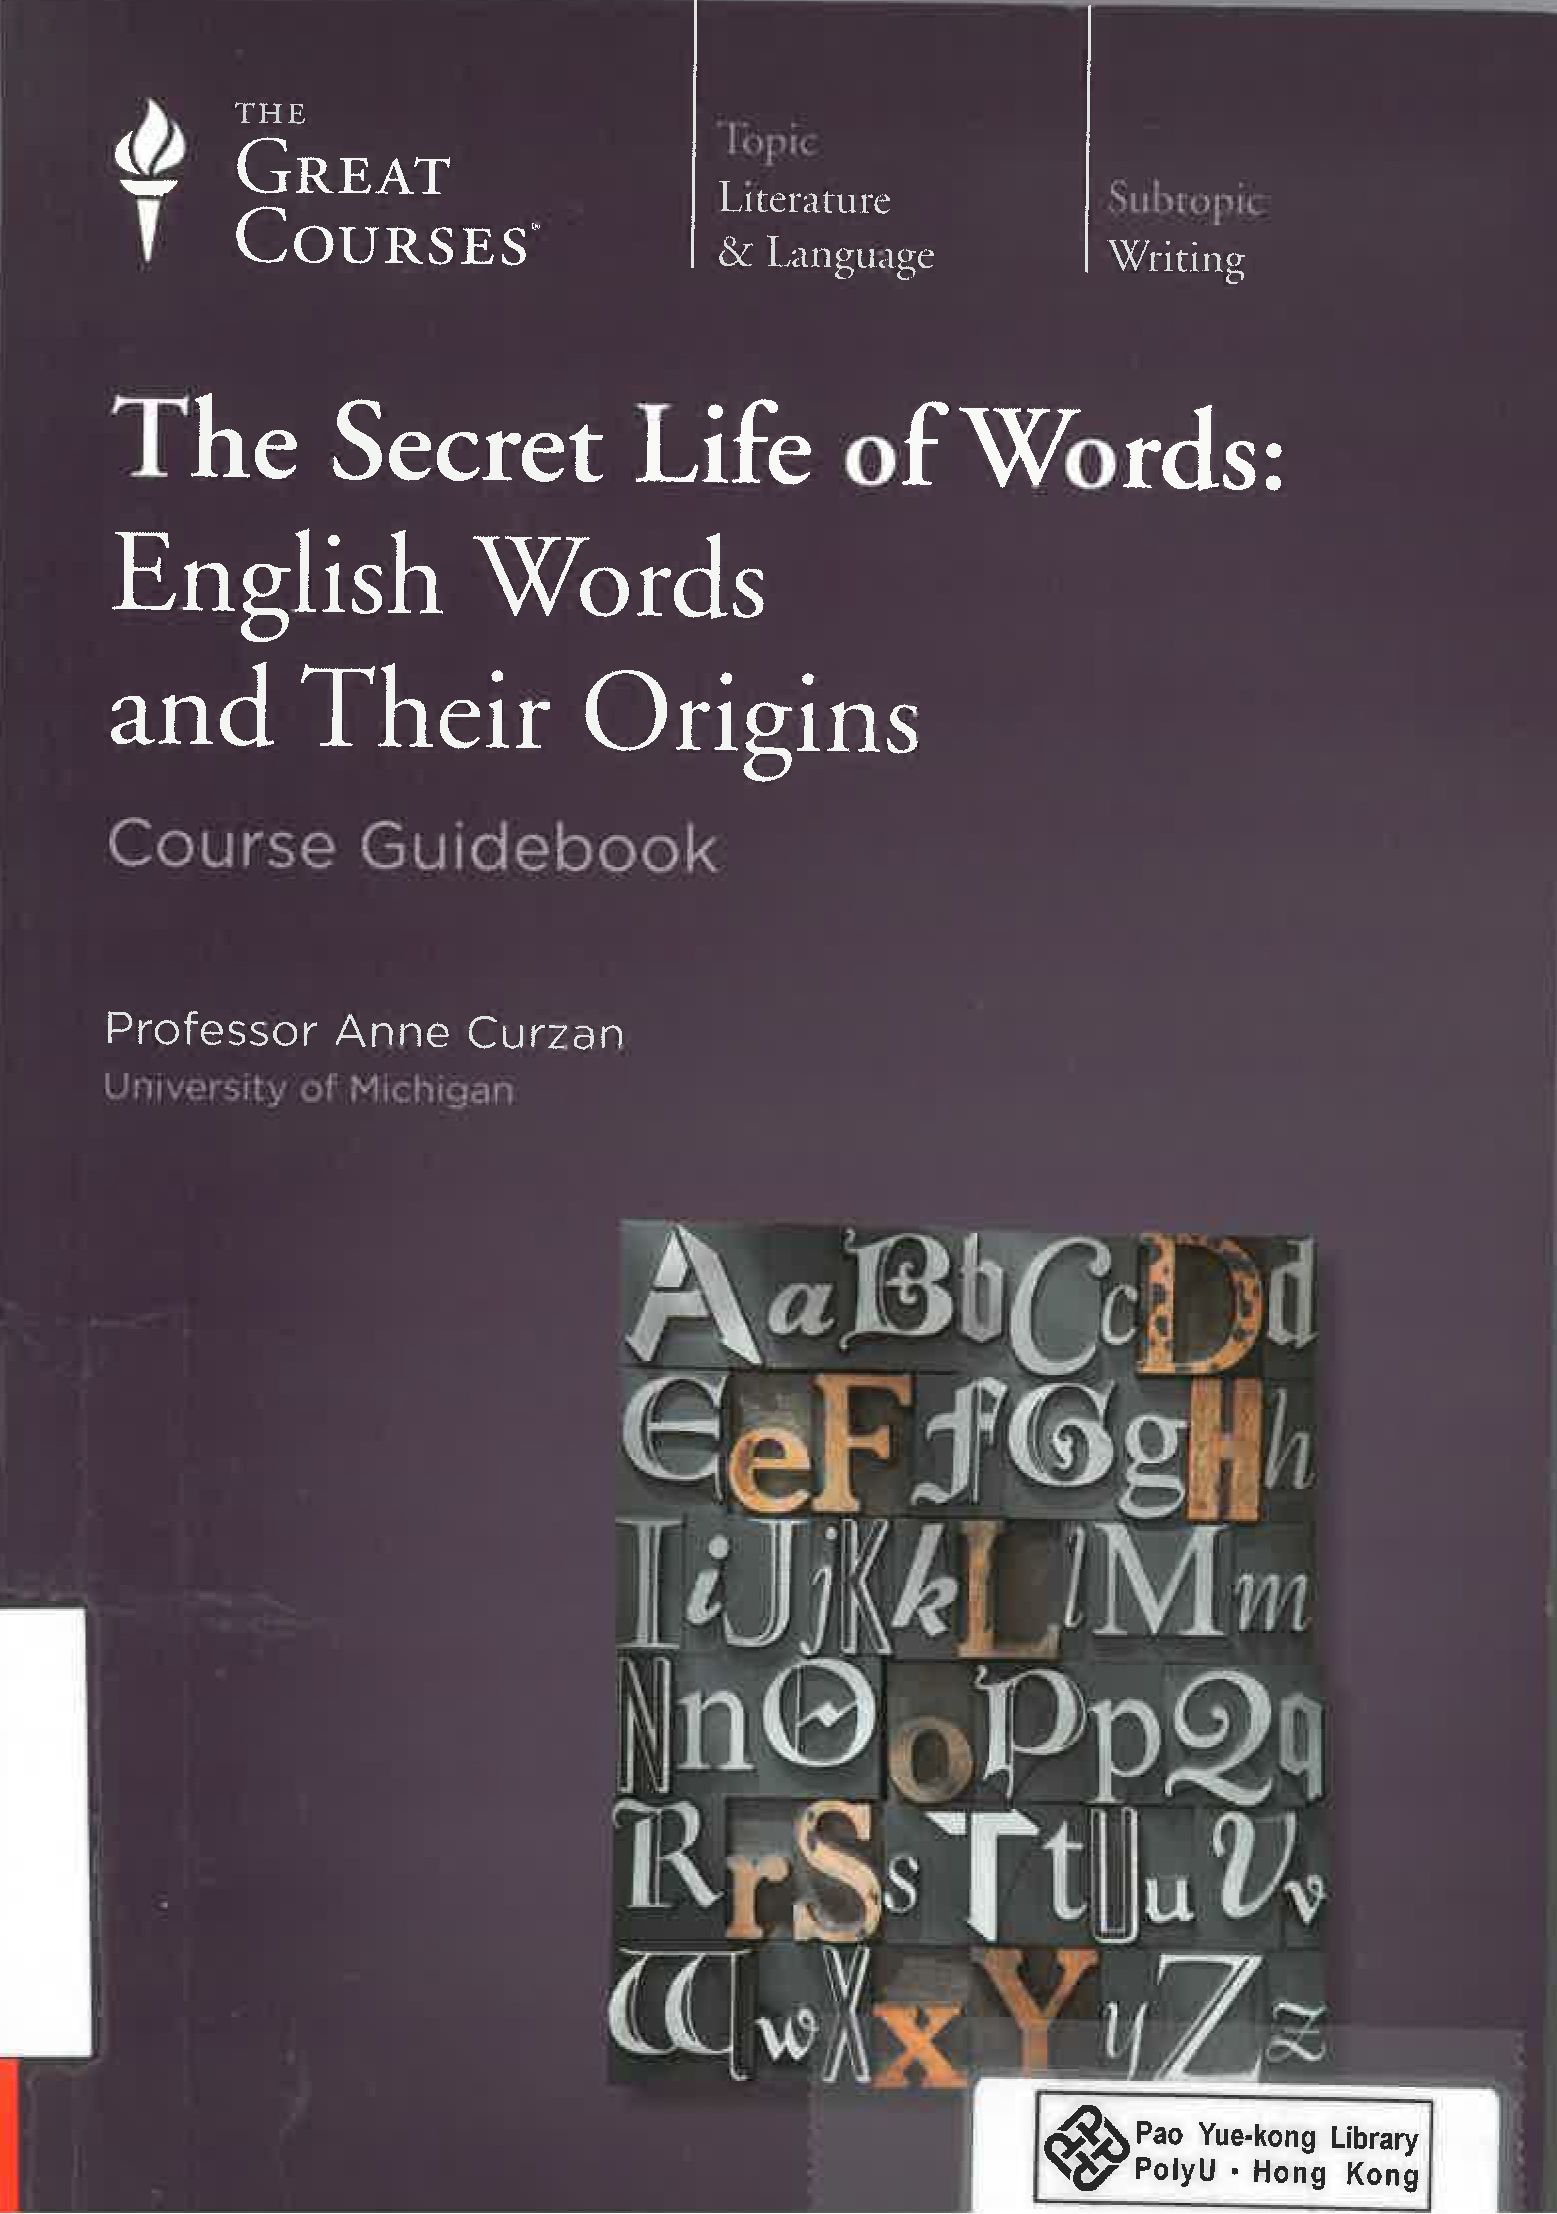 The secret life of words English words and their origins